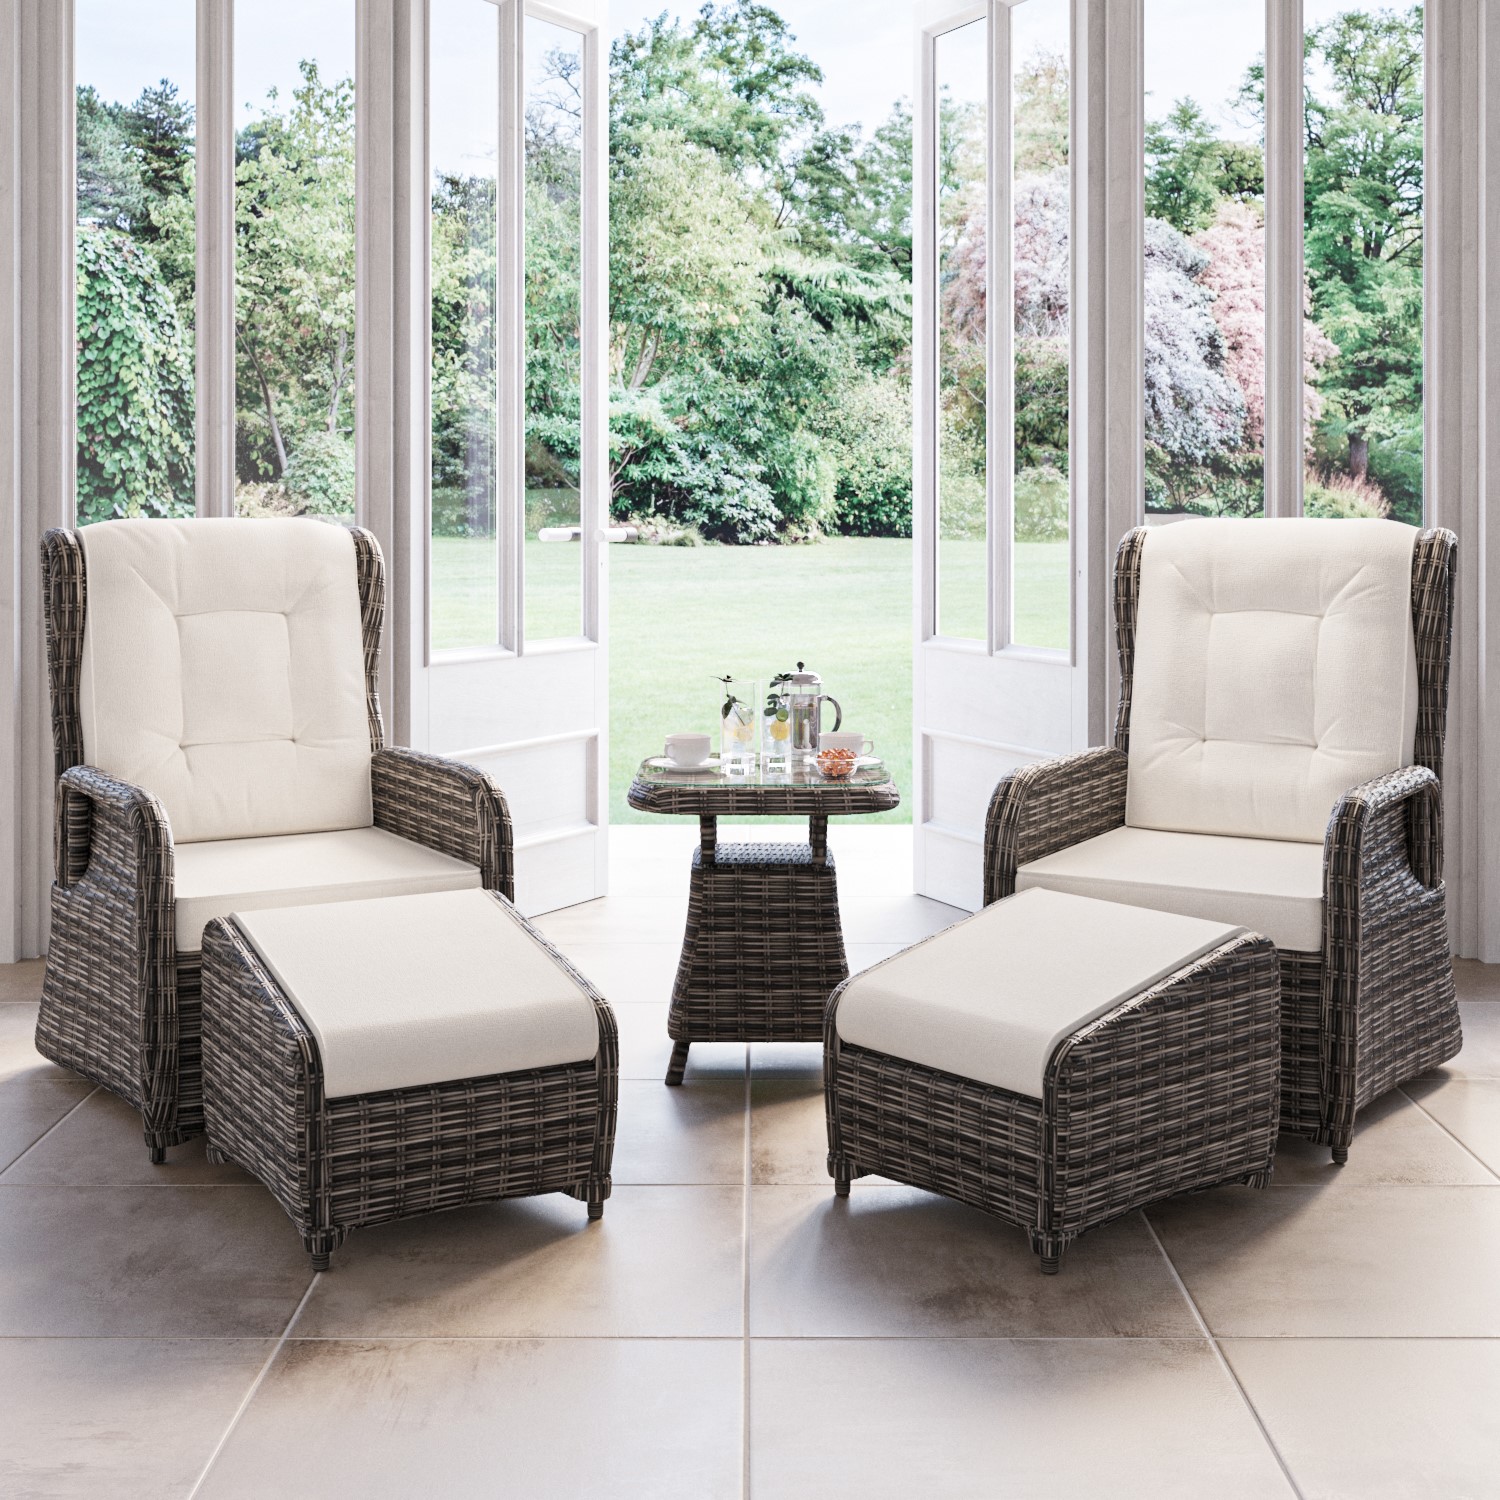 Read more about Brown rattan reclining garden sun lounger set with table and footstools aspen